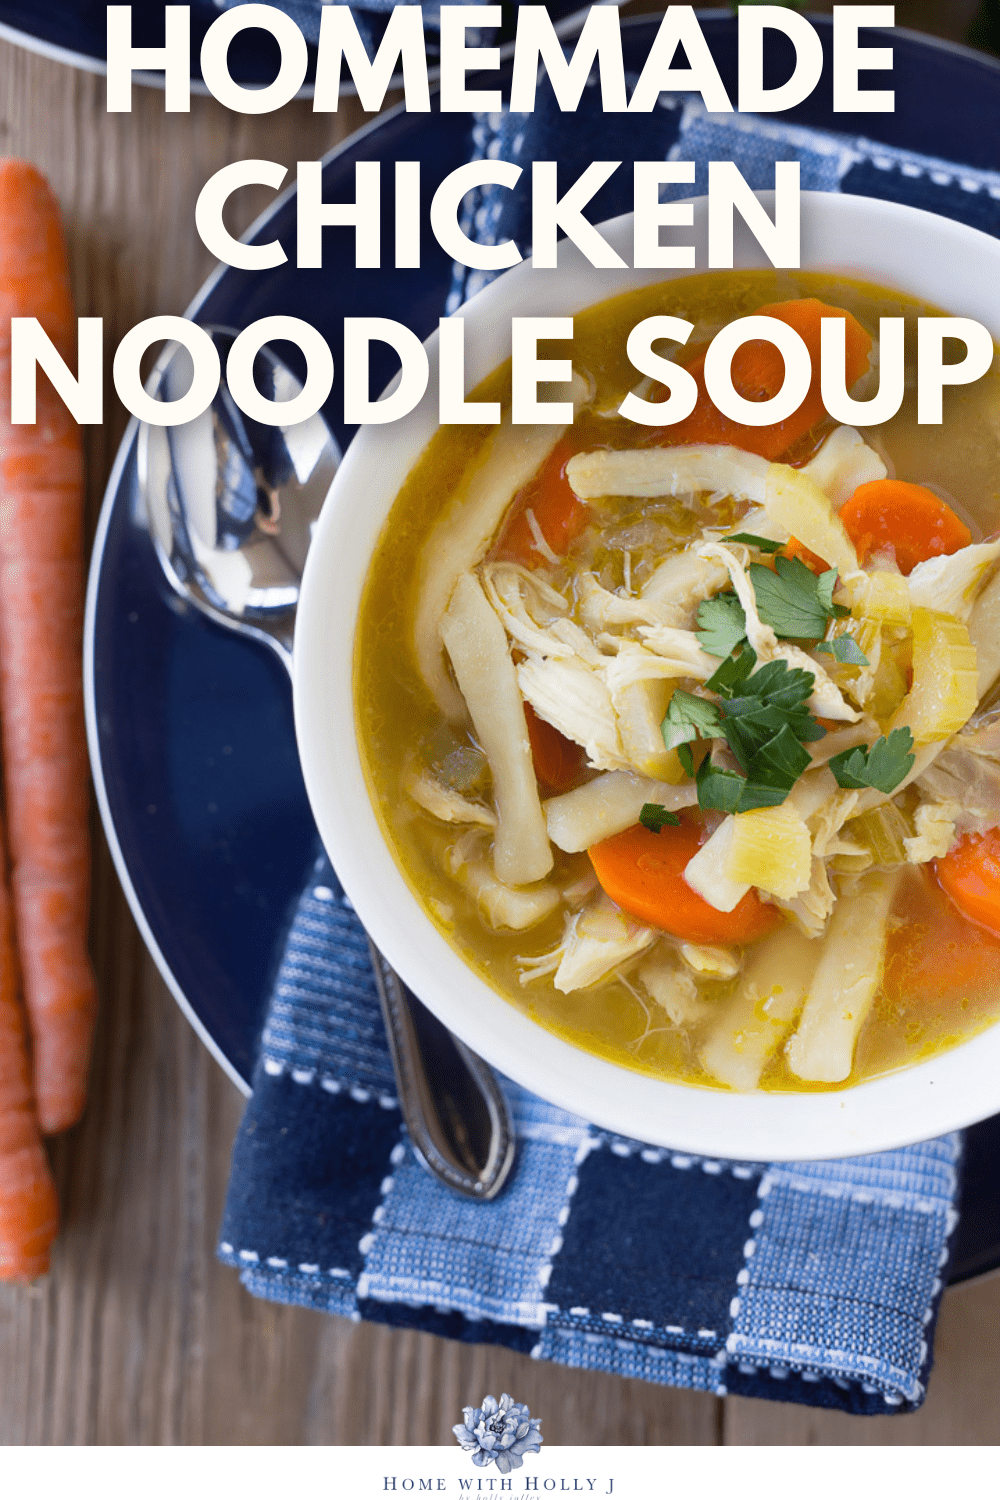 Delicious and comforting homemade chicken noodle soup recipe. Warm up with this classic dish packed with flavorful ingredients. Get it here.